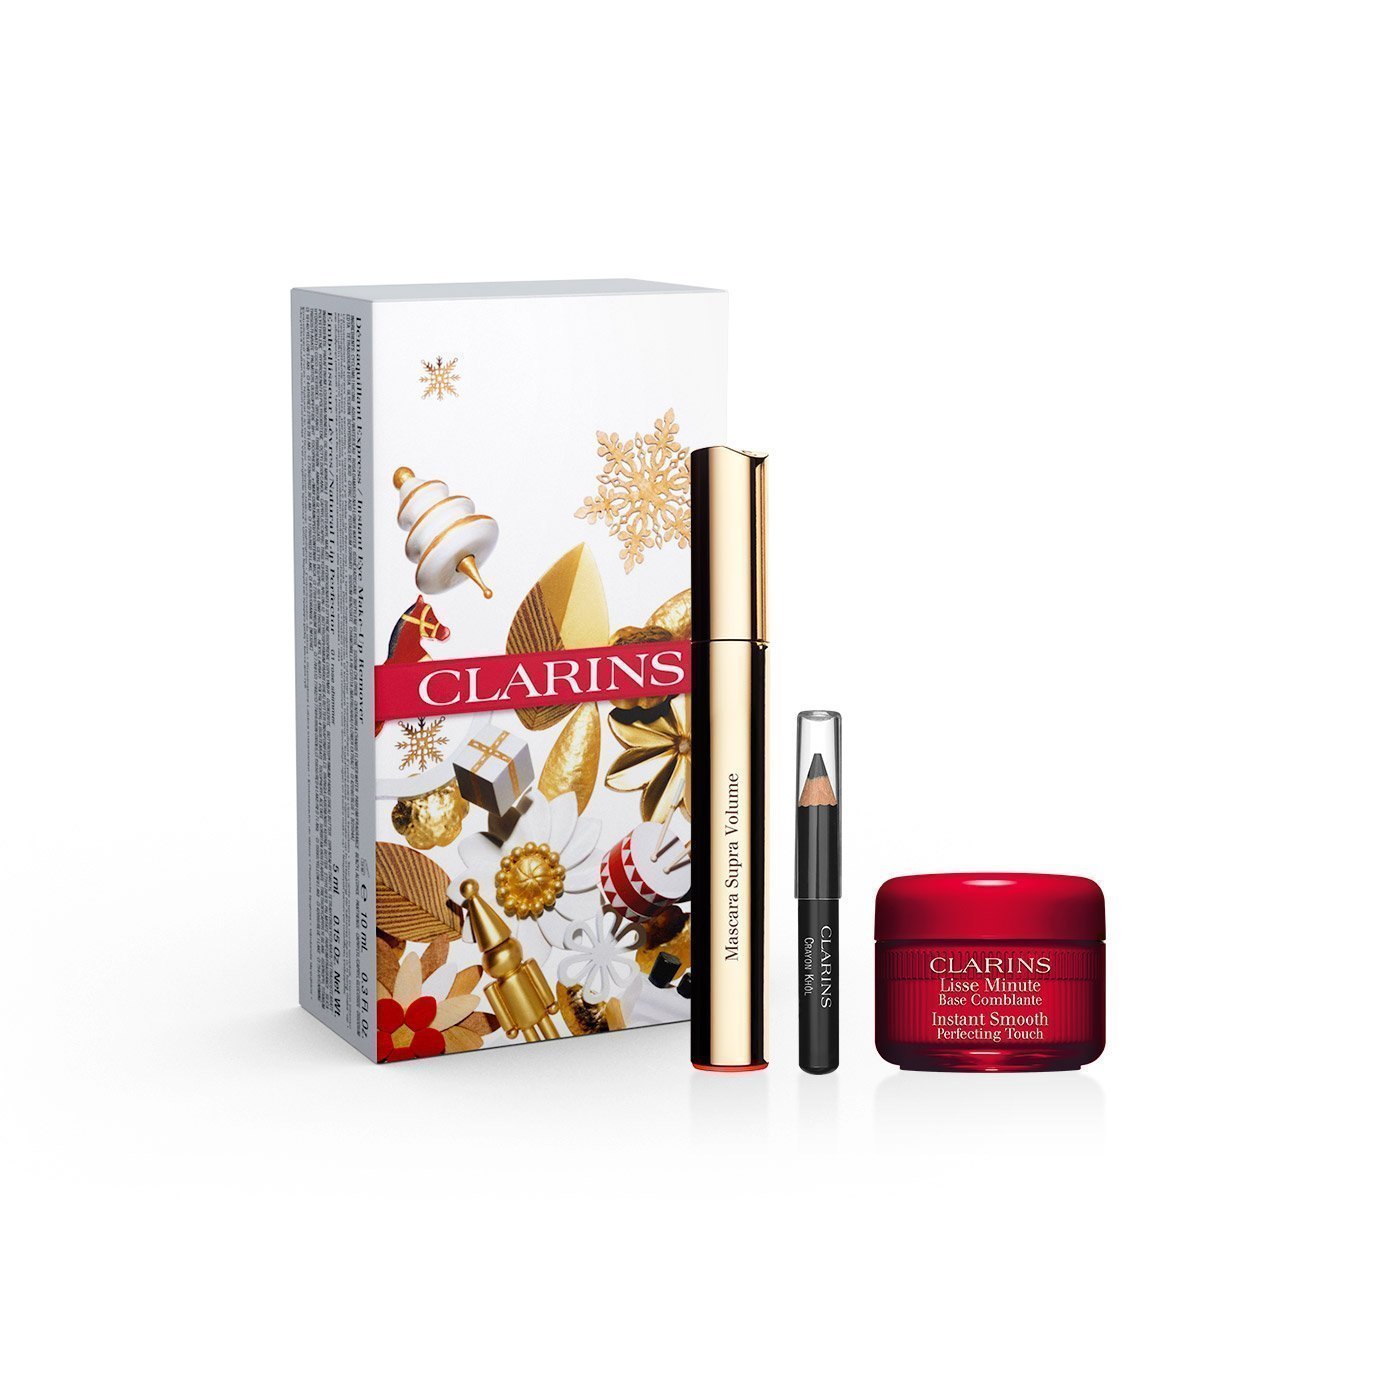 Clarins Christmas gift sets